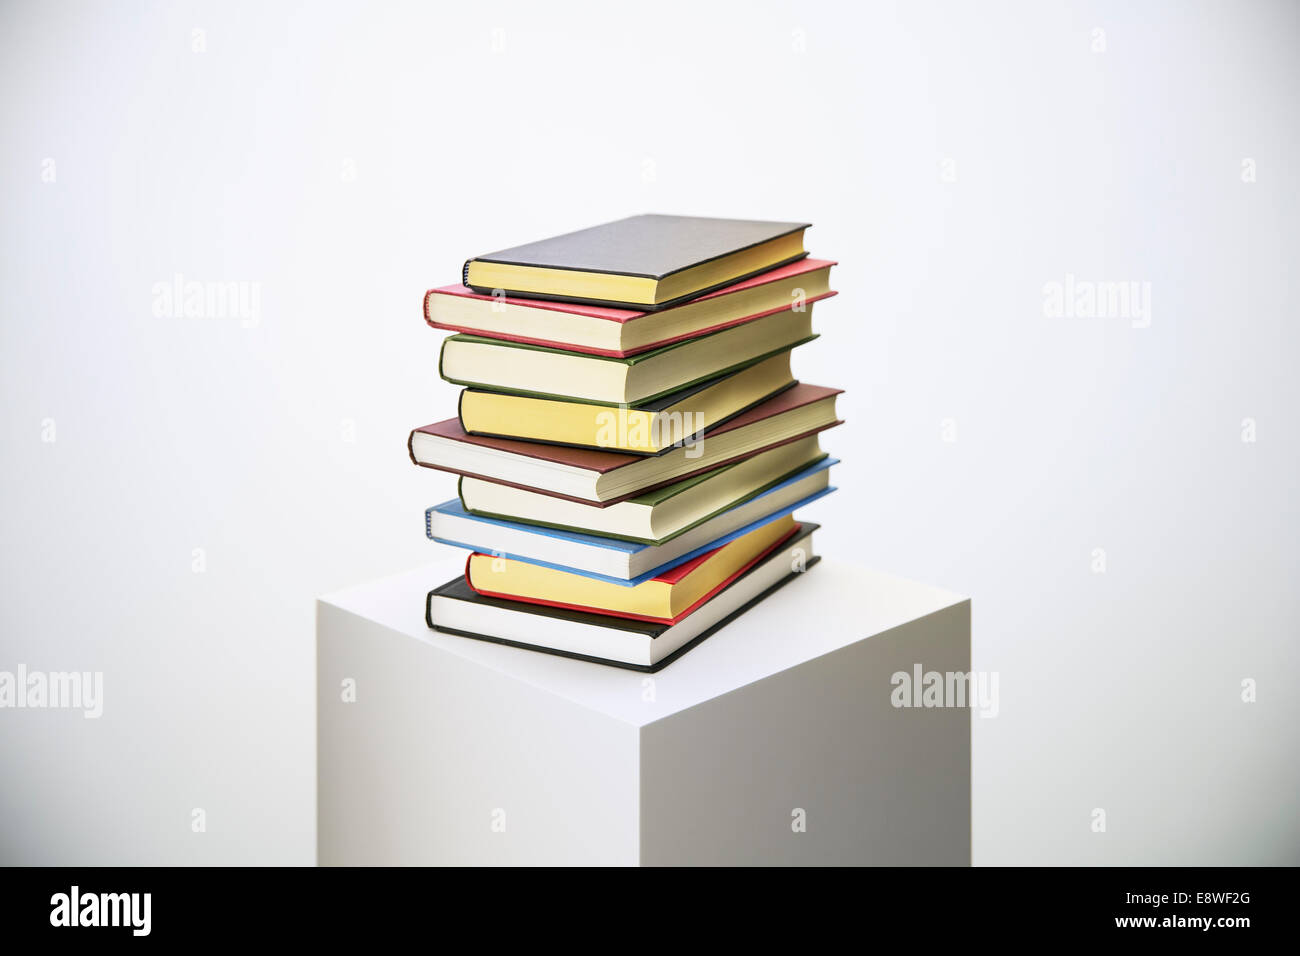 Stack of books on pedestal Stock Photo